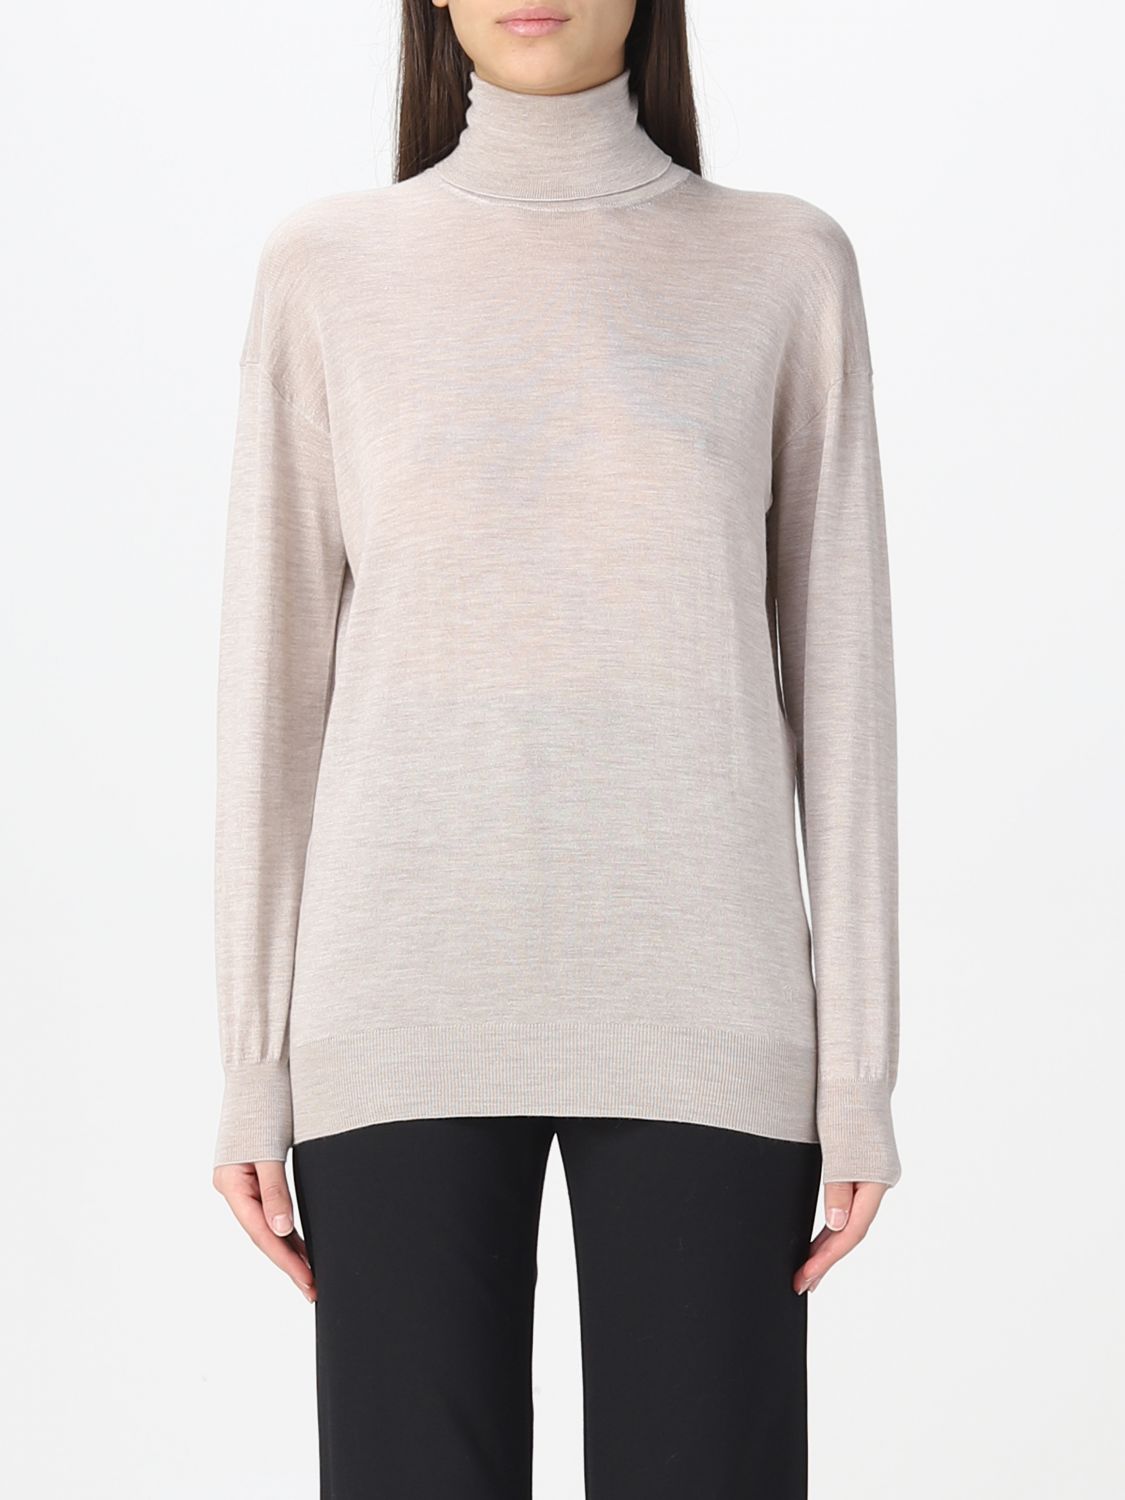 TOM FORD SWEATER TOM FORD WOMAN COLOR BEIGE,D18707022